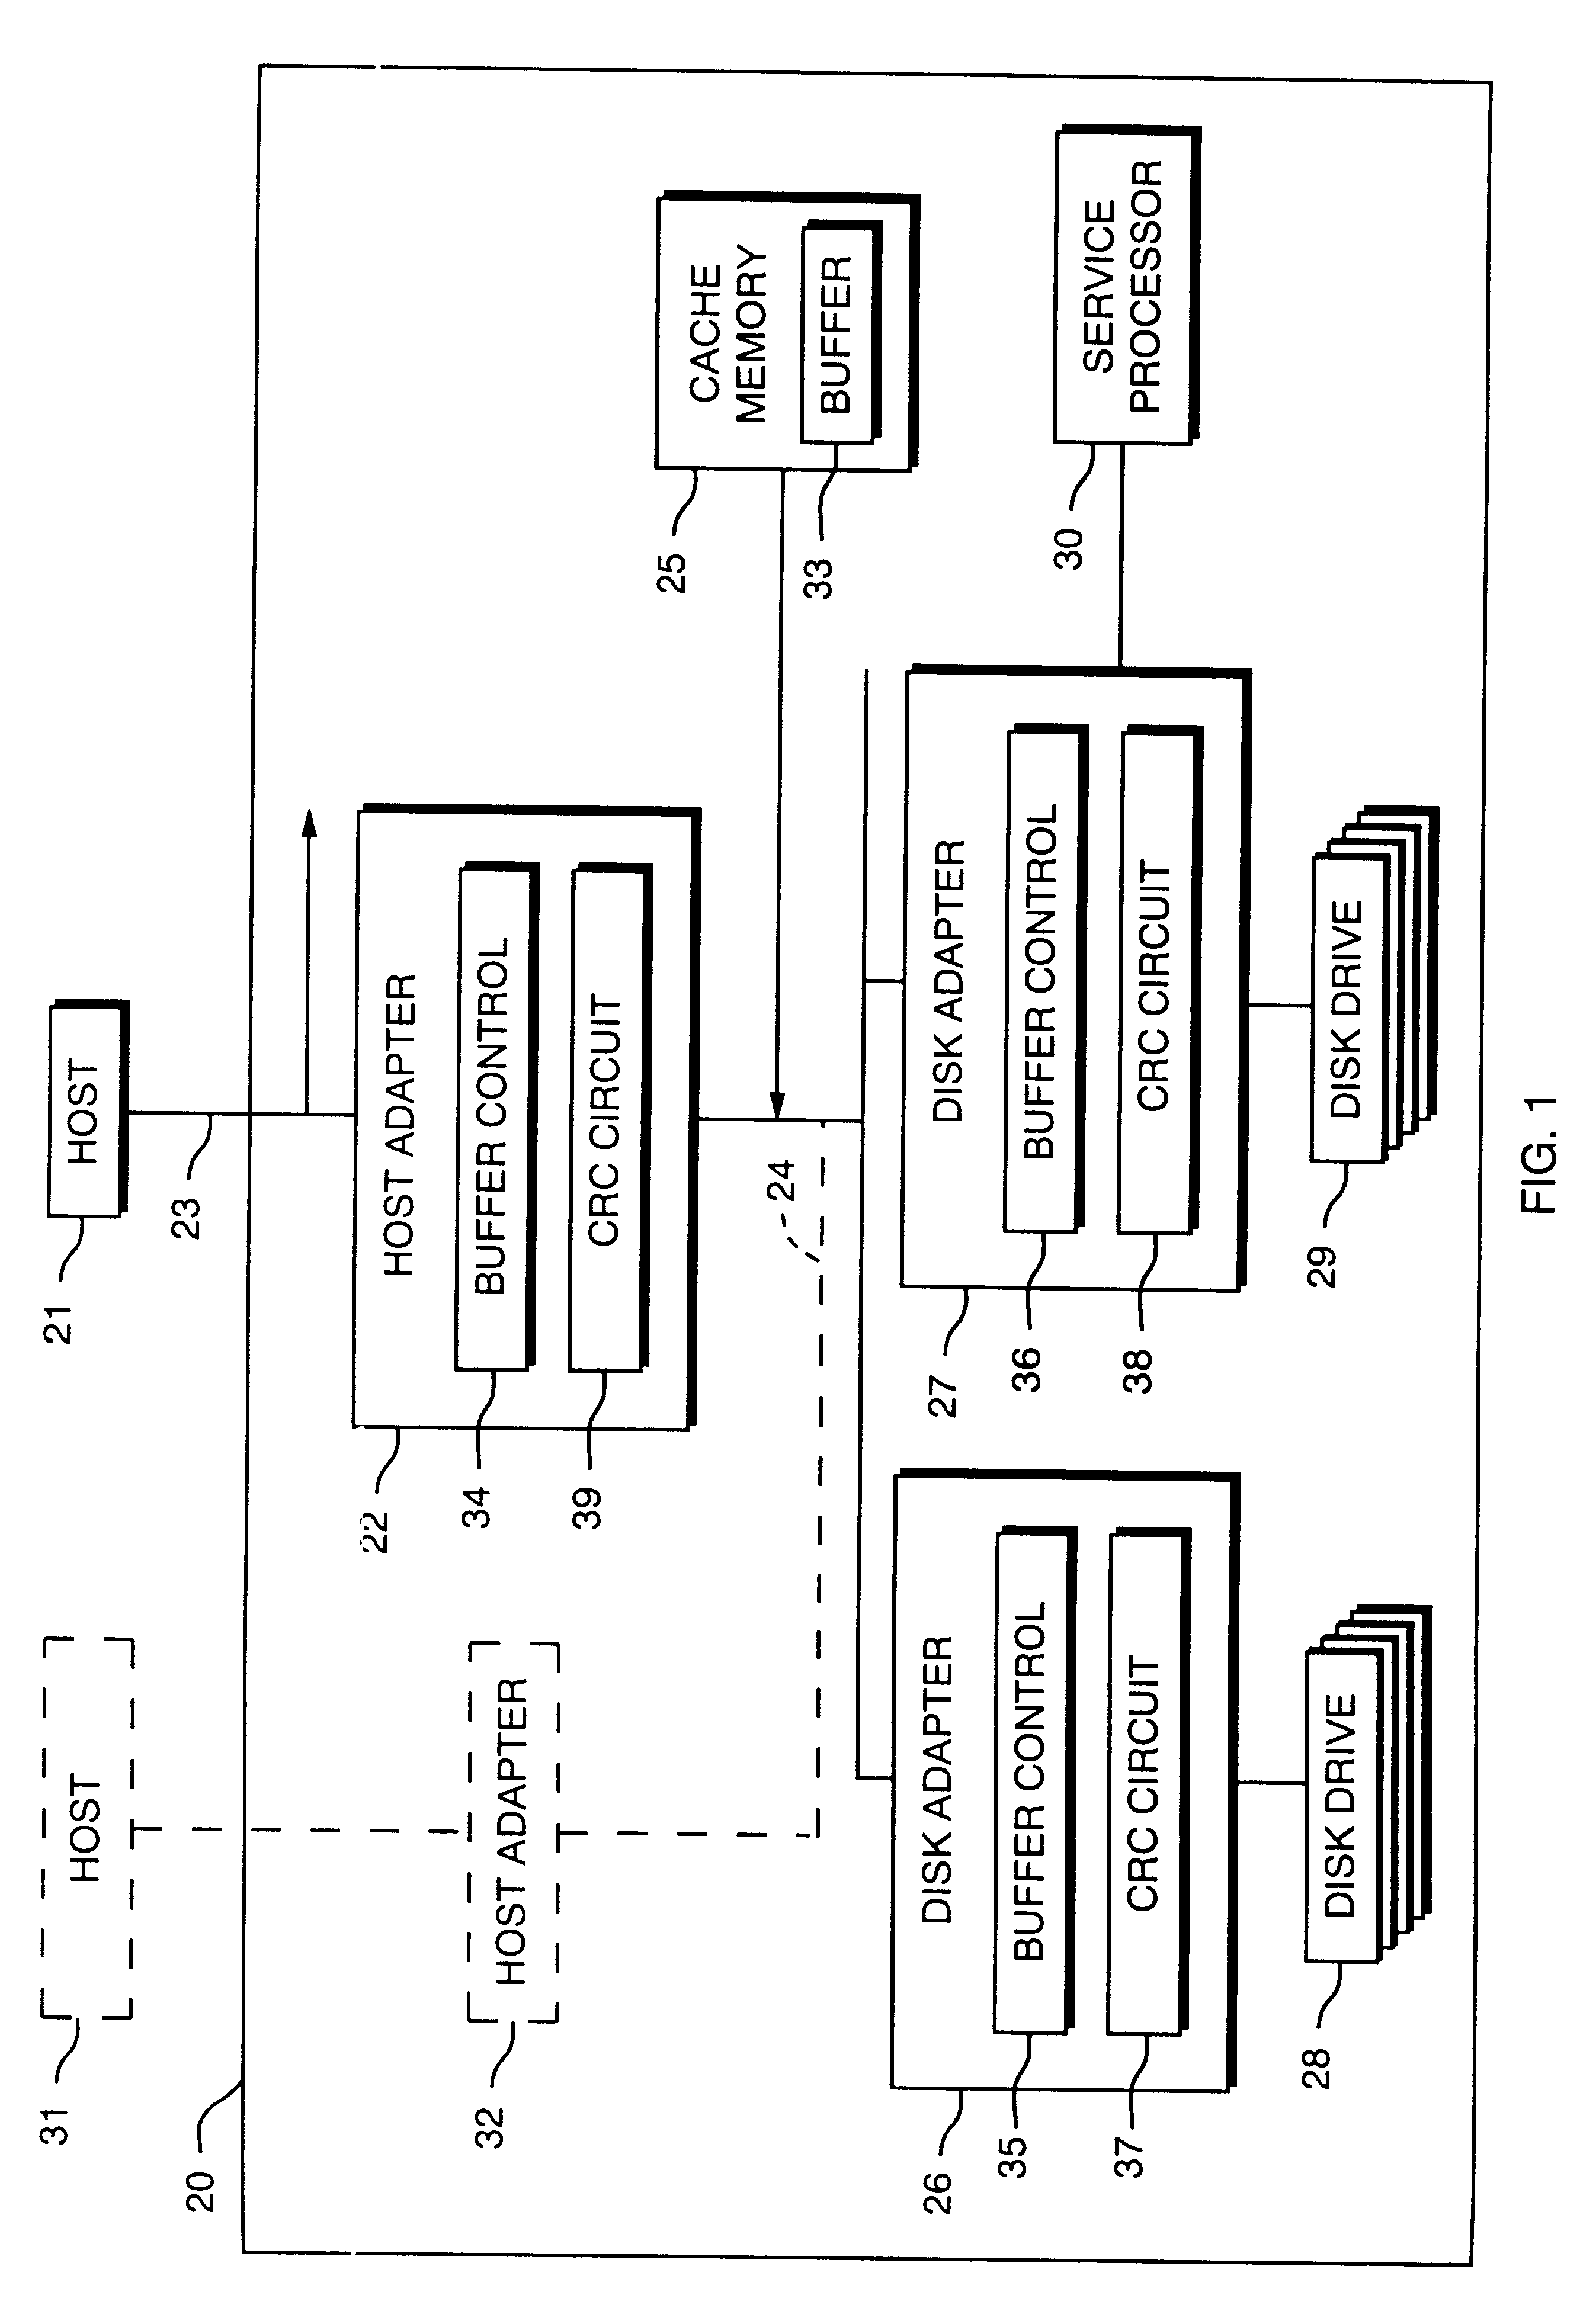 Magnetic disk storage for storing data in disk block size from fixed length of host block in non-integer multiple of the disk block size